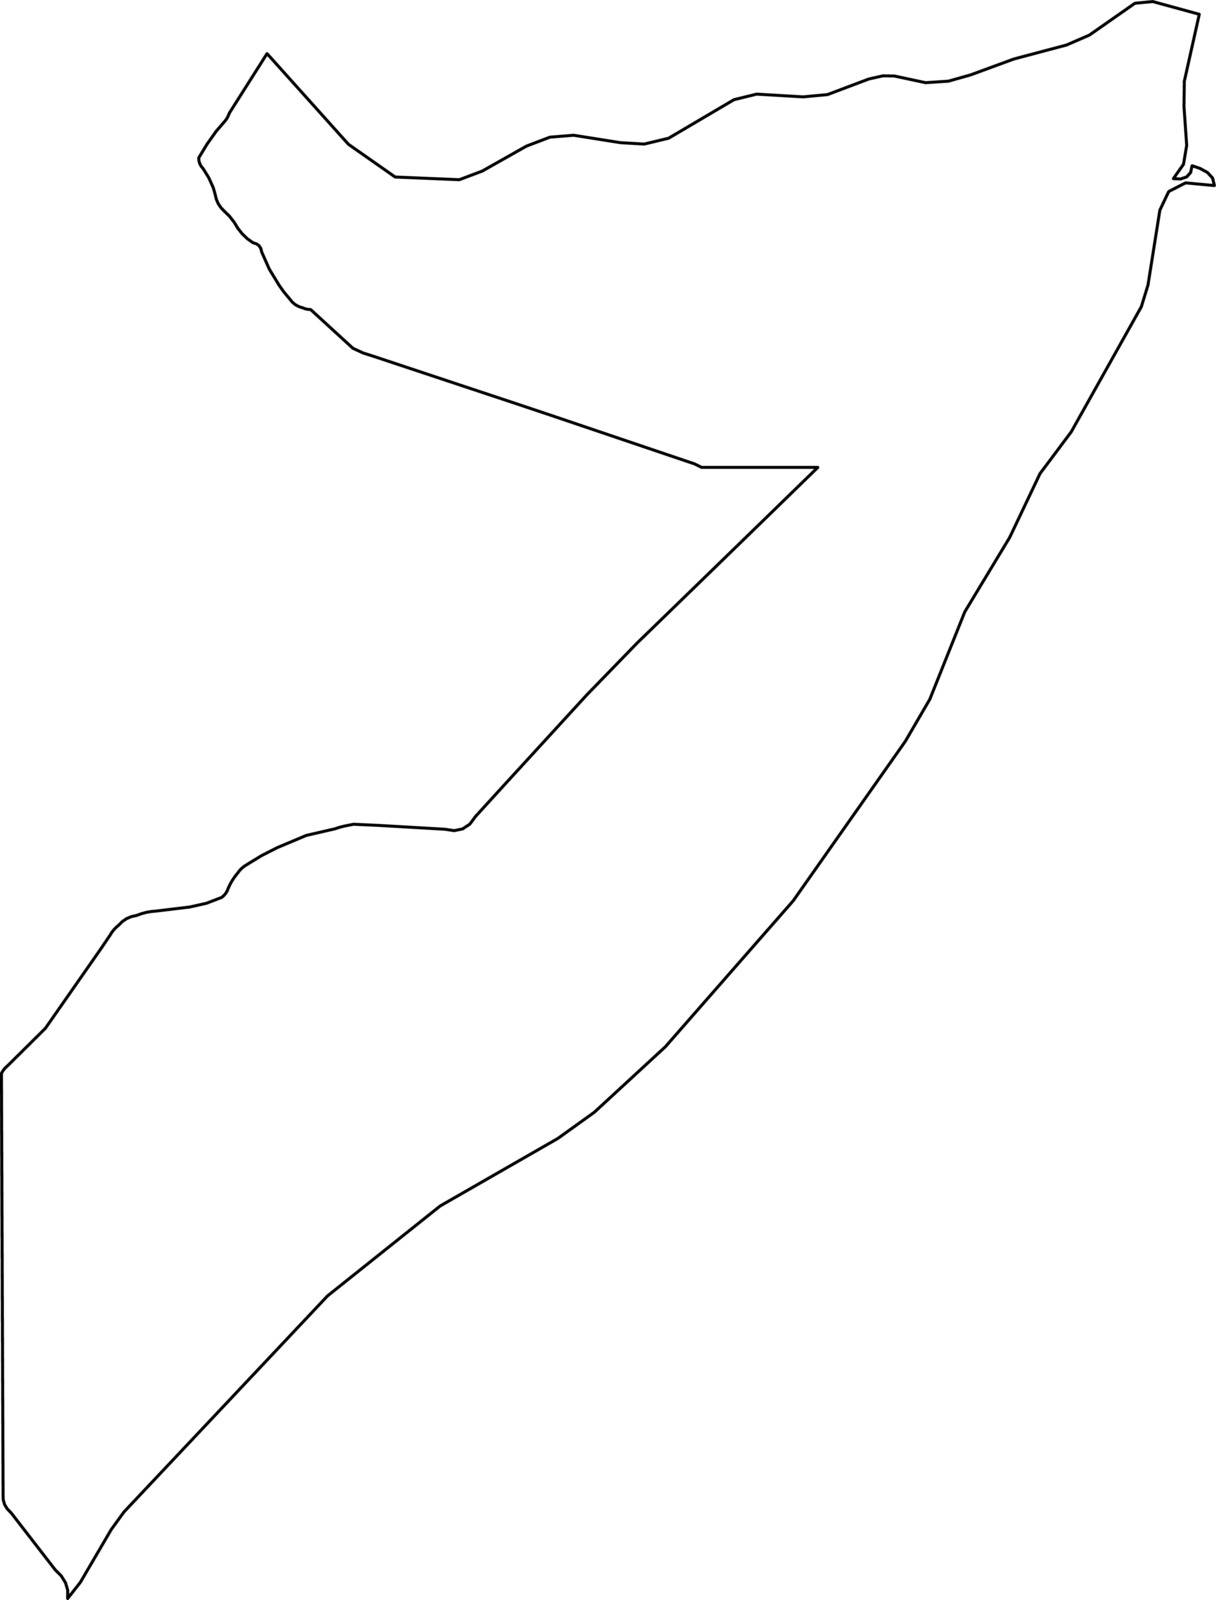 Somalia - solid black outline border map of country area. Simple flat vector illustration by pyty